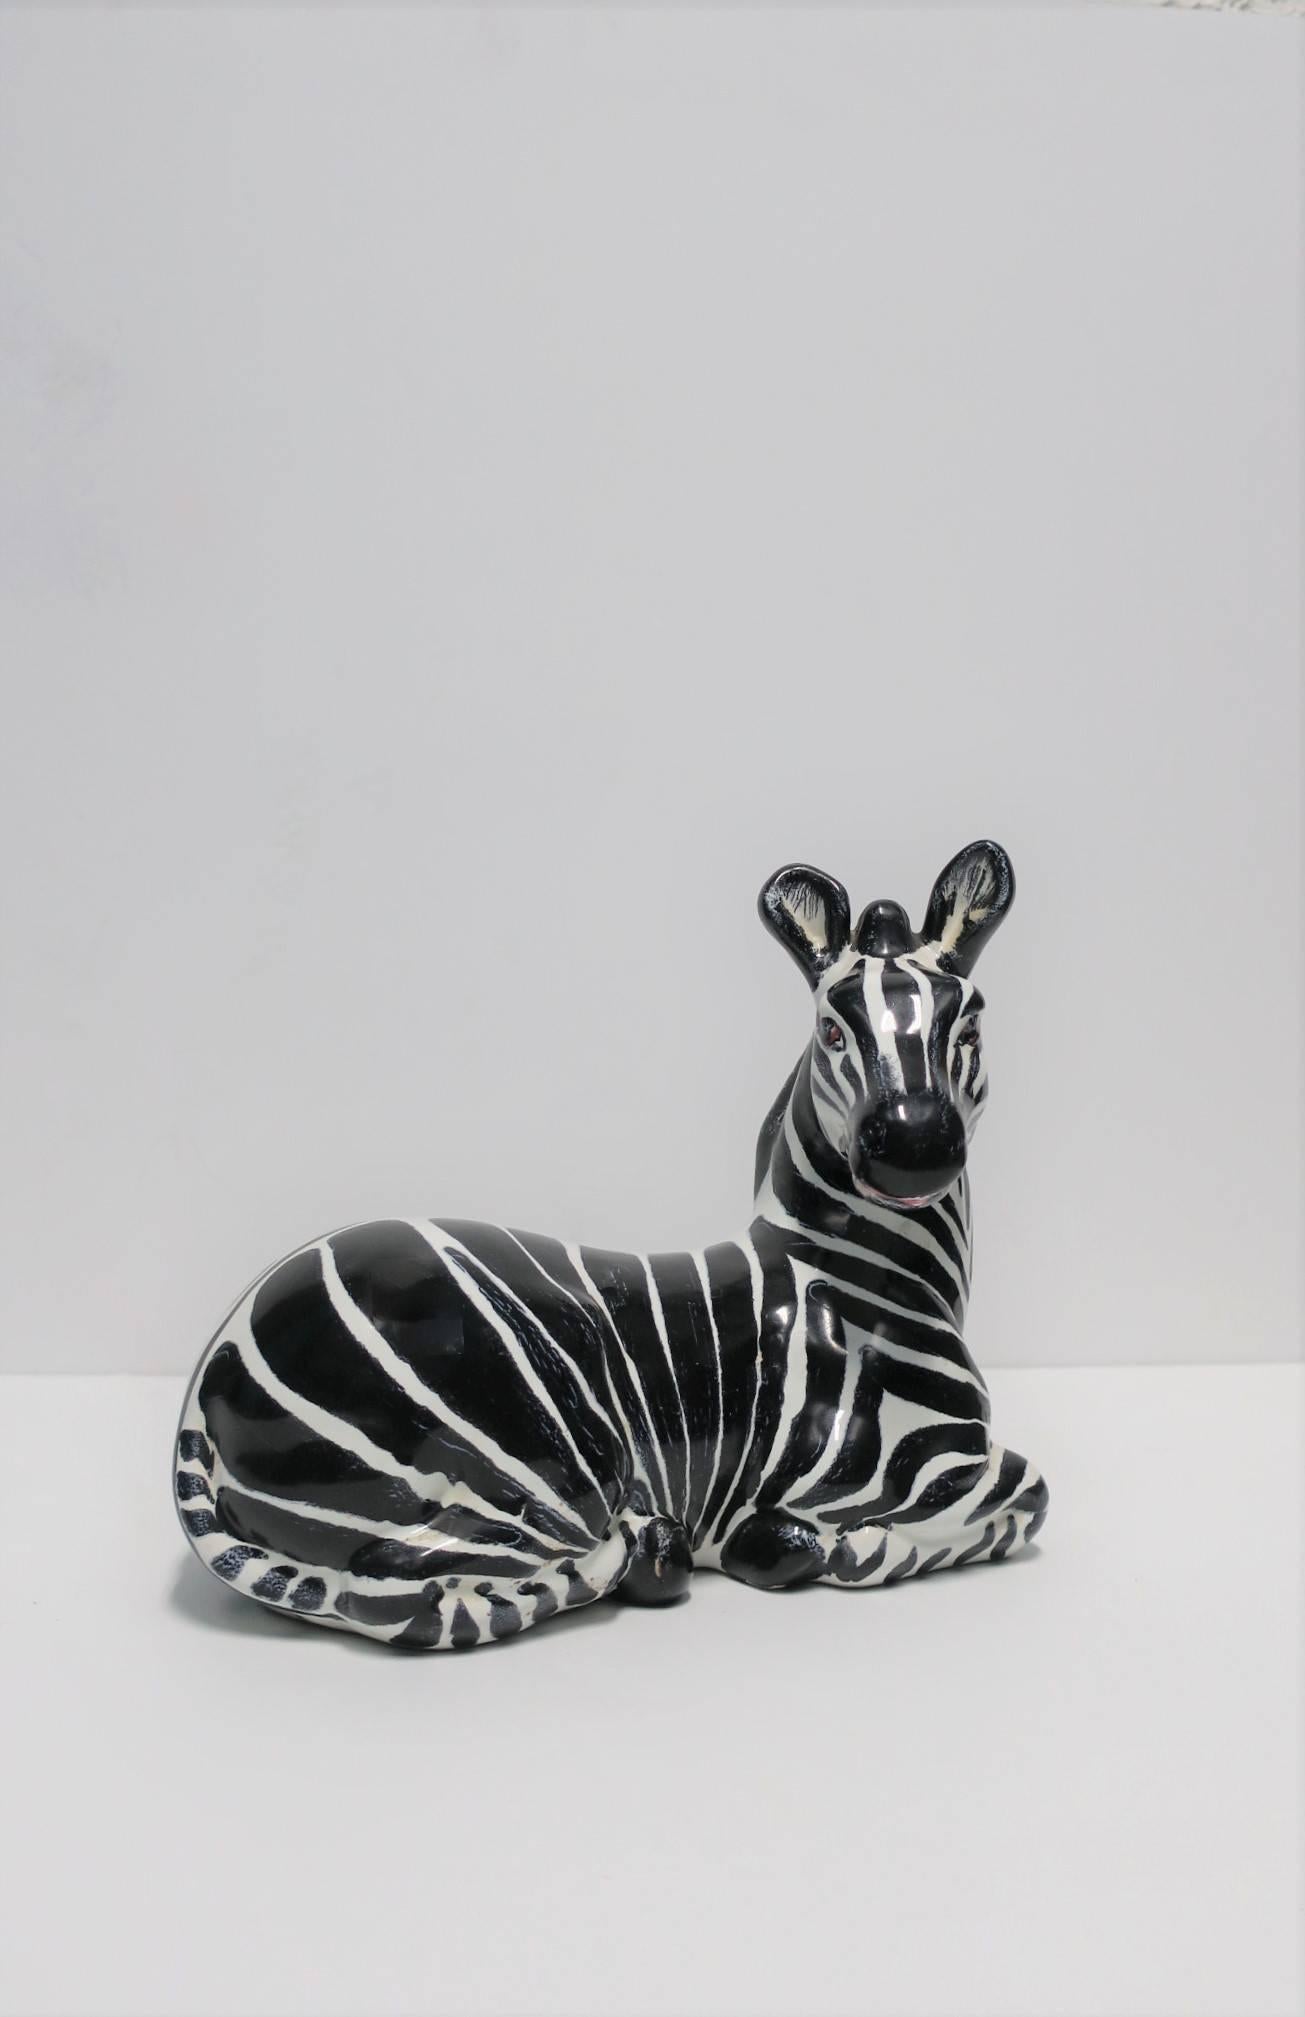 A beautiful, striking and relatively large, vintage Italian black and white zebra horse ceramic sculpture in the Art Deco style, circa 1970s, Italy. Marked 'Hand Made Italy' on bottom/underneath as show in images #12 and 13. 

Measures: 4.75